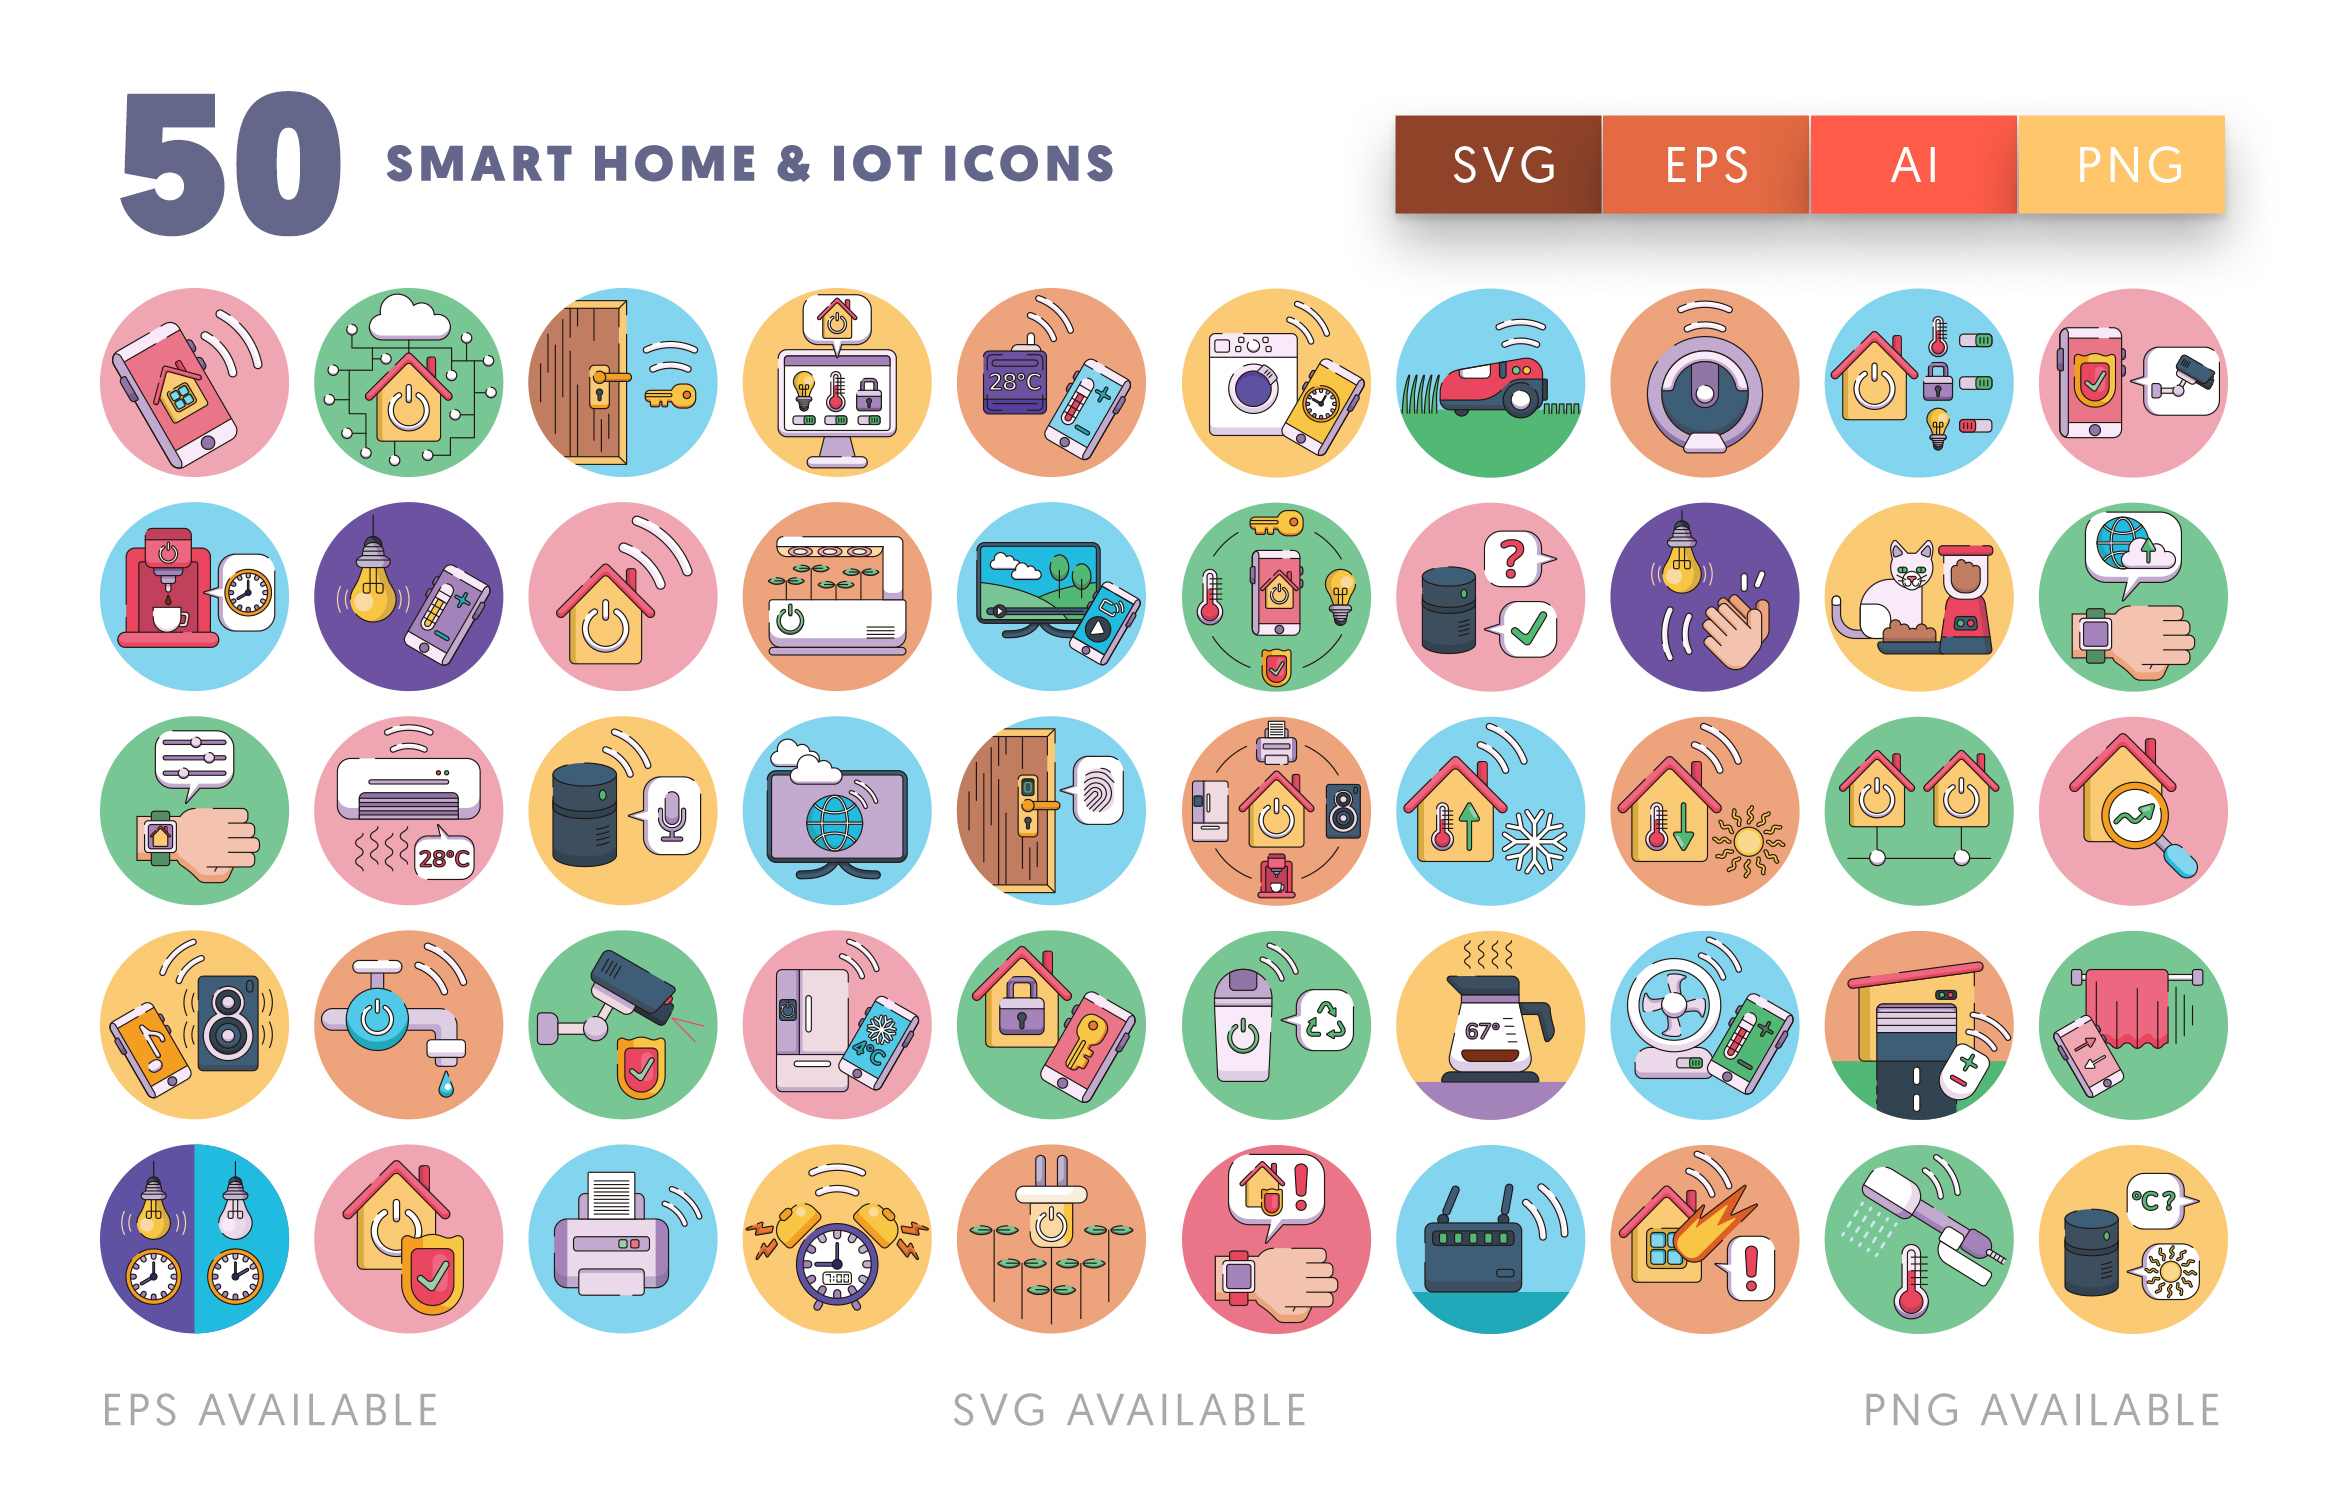 50 Smart home & IoT Icons